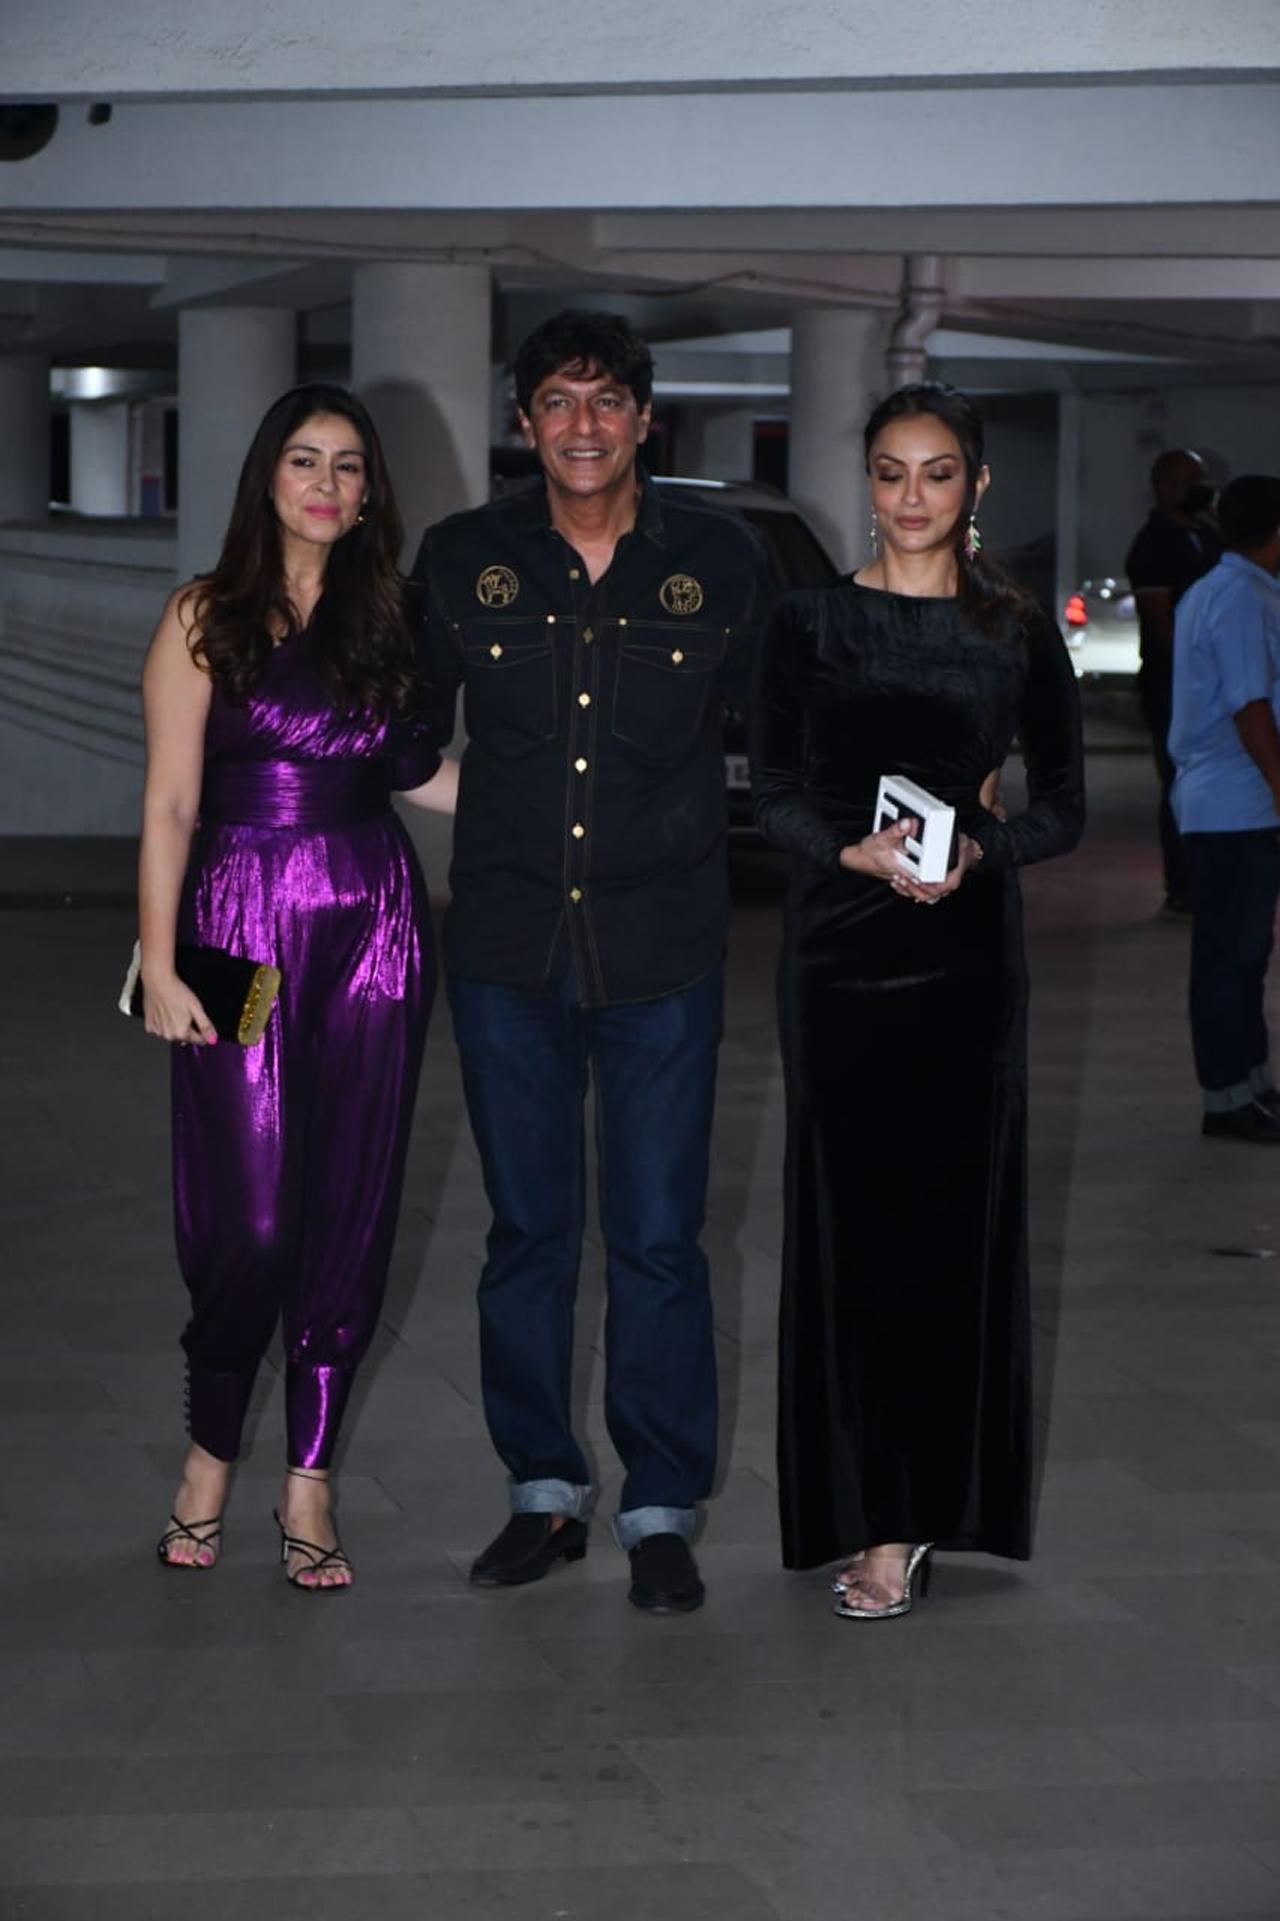 Chunky Pandey walked hand-in-hand with wife Bhavna Pandey and sister-in-law Deanne at the party.